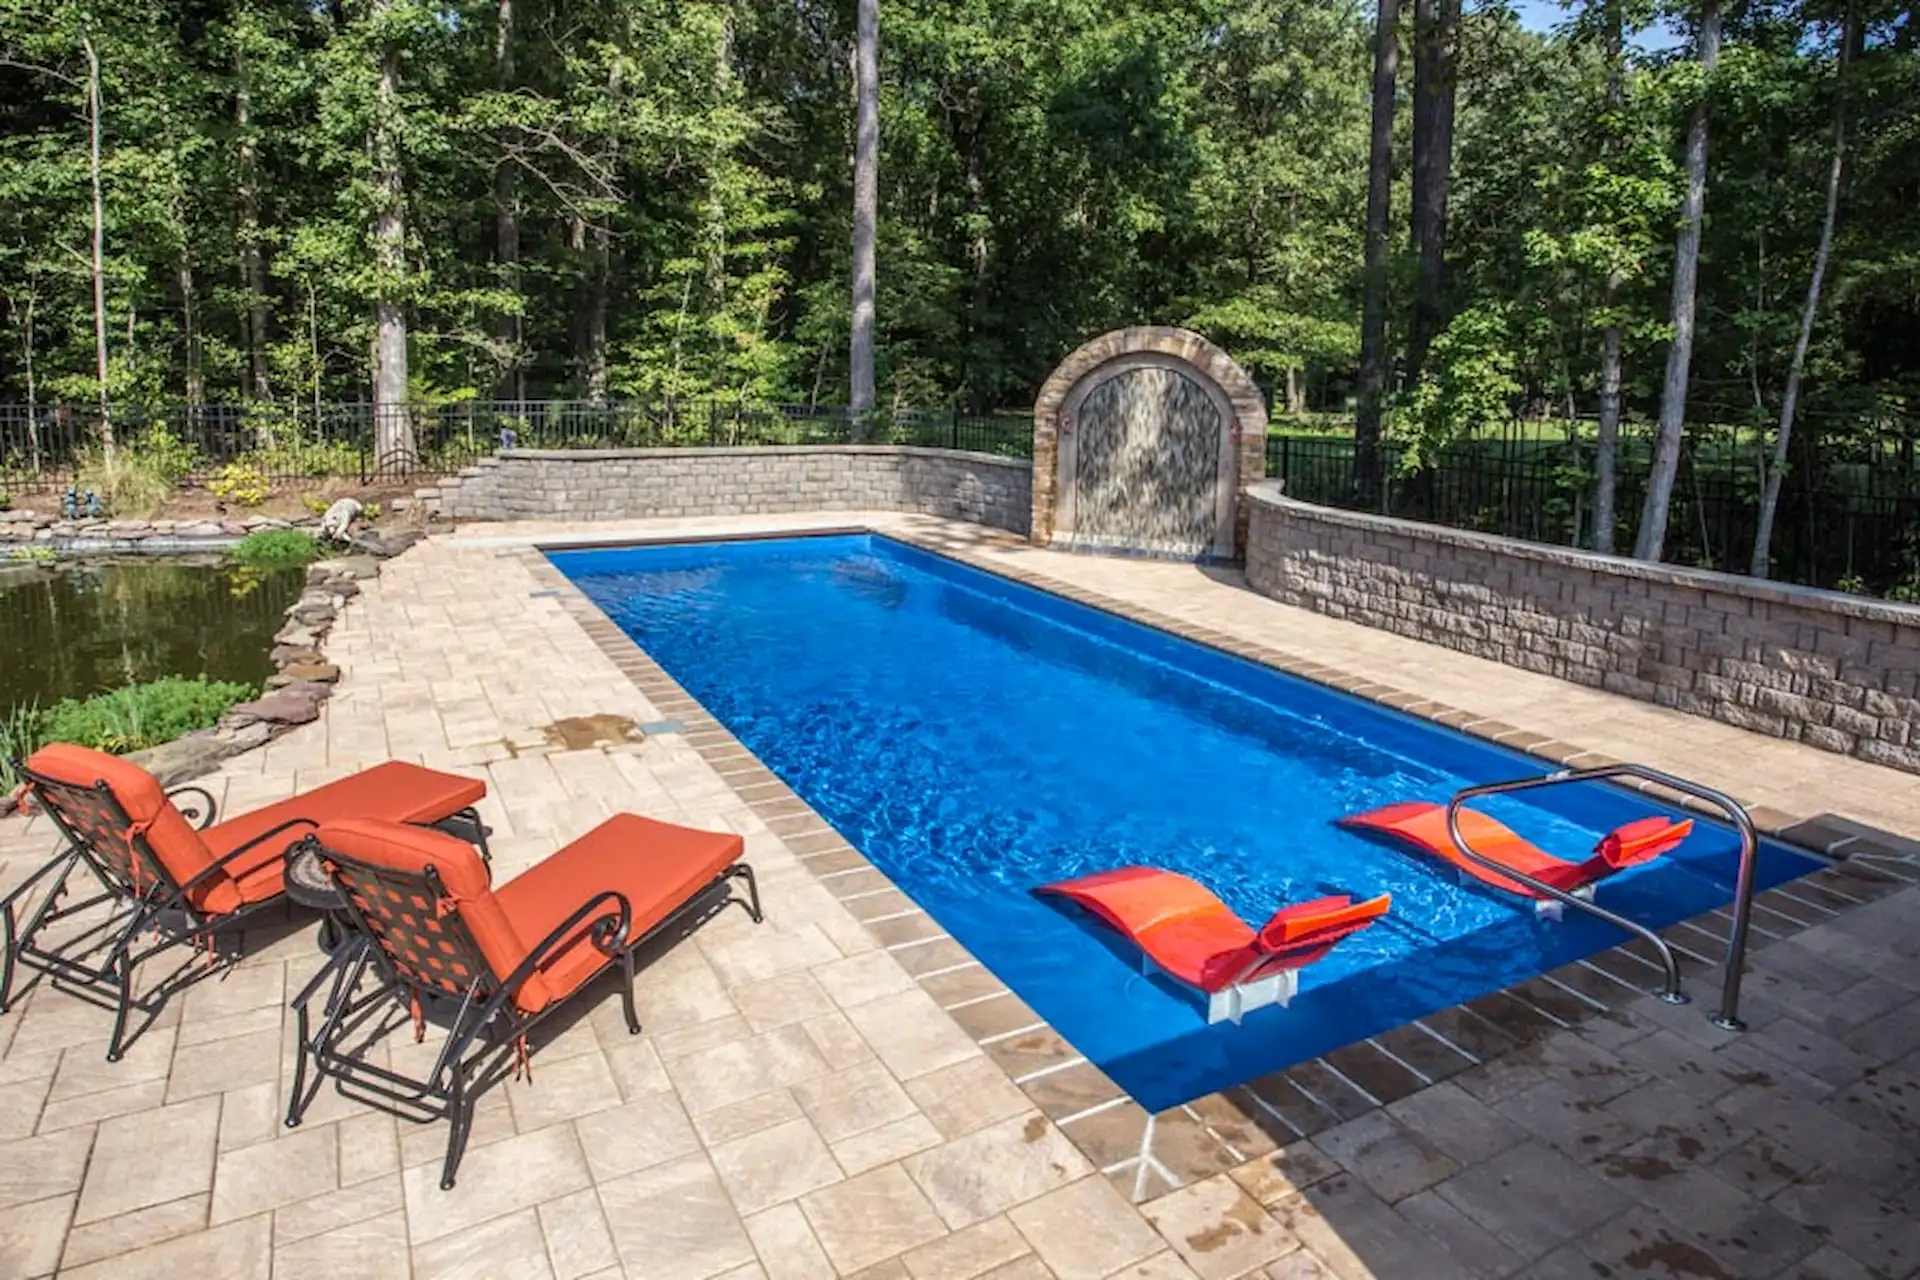 Is Your Swimming Pool Ready for Summer?